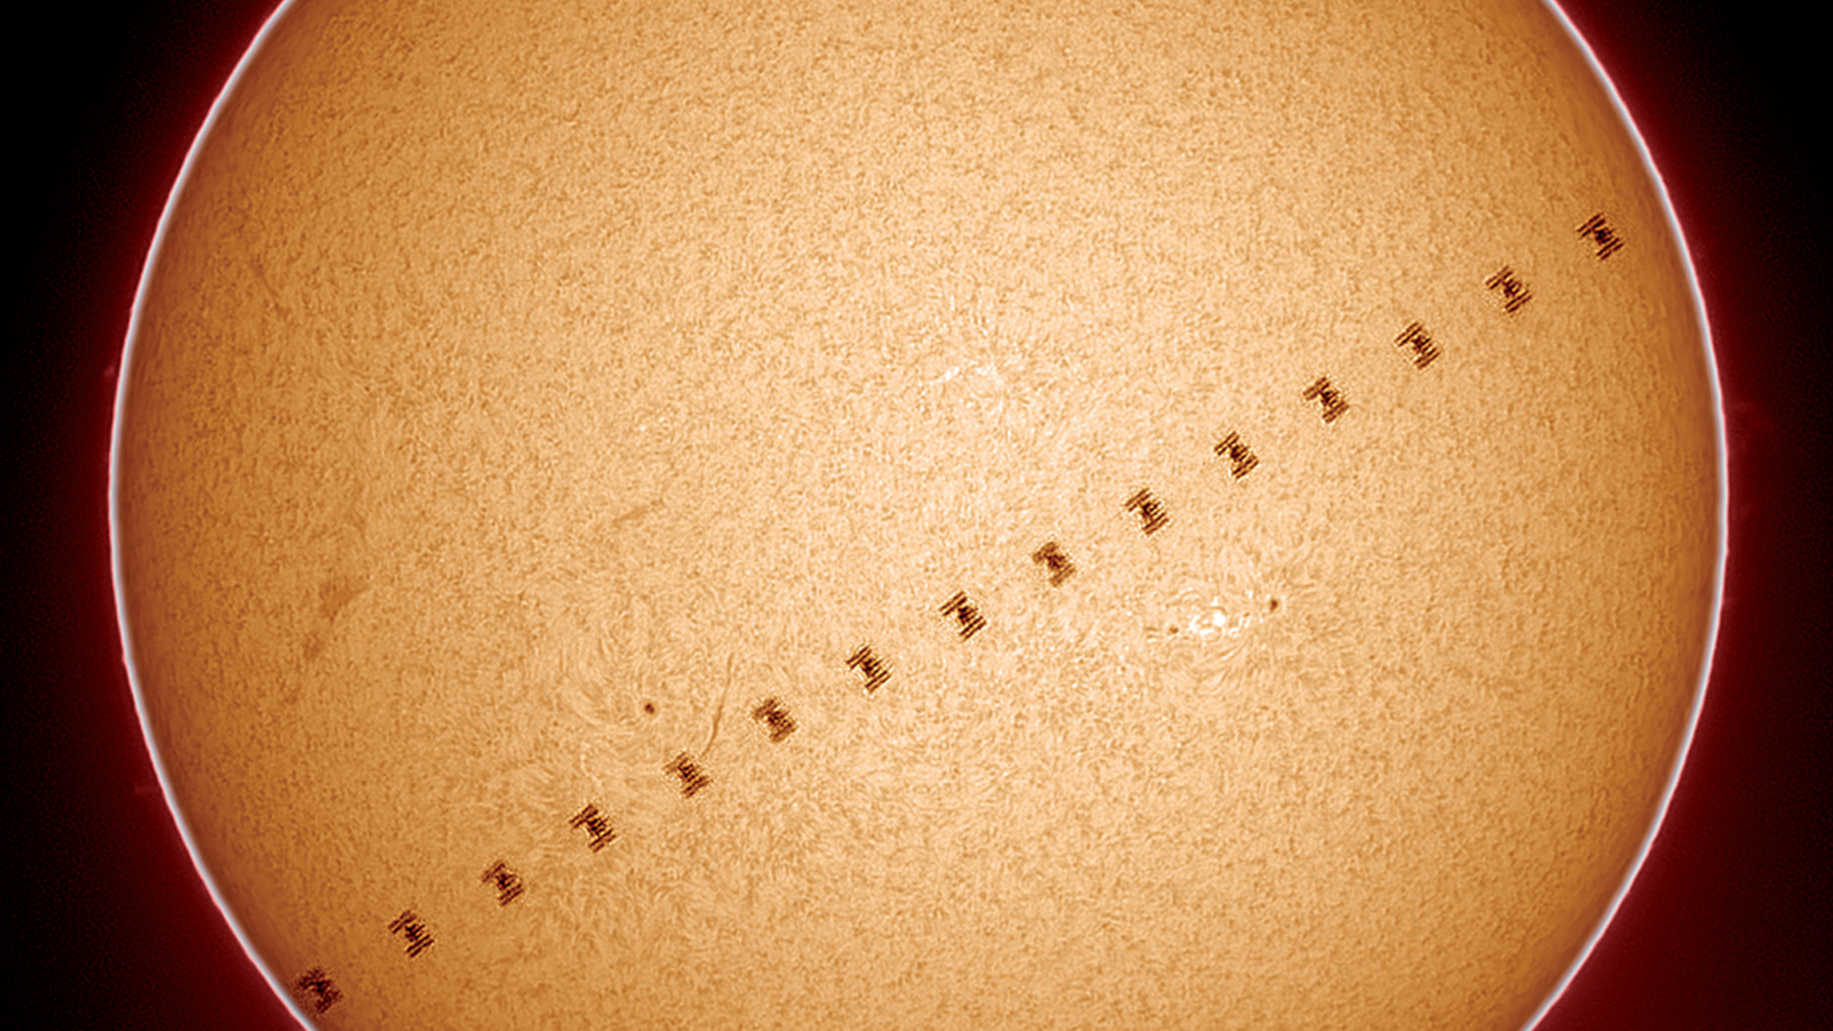 The transit of the International Space Station ISS, captured here in Hα light, took place on 17.6.2017 at 18:57:03, when the sun stood 64.7 degrees above the horizon in the southern sky. The distance between the ISS and the observation site was 451.6 kilometres, so the transit took just 0.6 seconds and the space station appeared to be comparatively large. The picture was taken with a Coronado Solarmax60, other equipment as shown in the third illustration. The picture is a composite of 16 images. U. Dittler